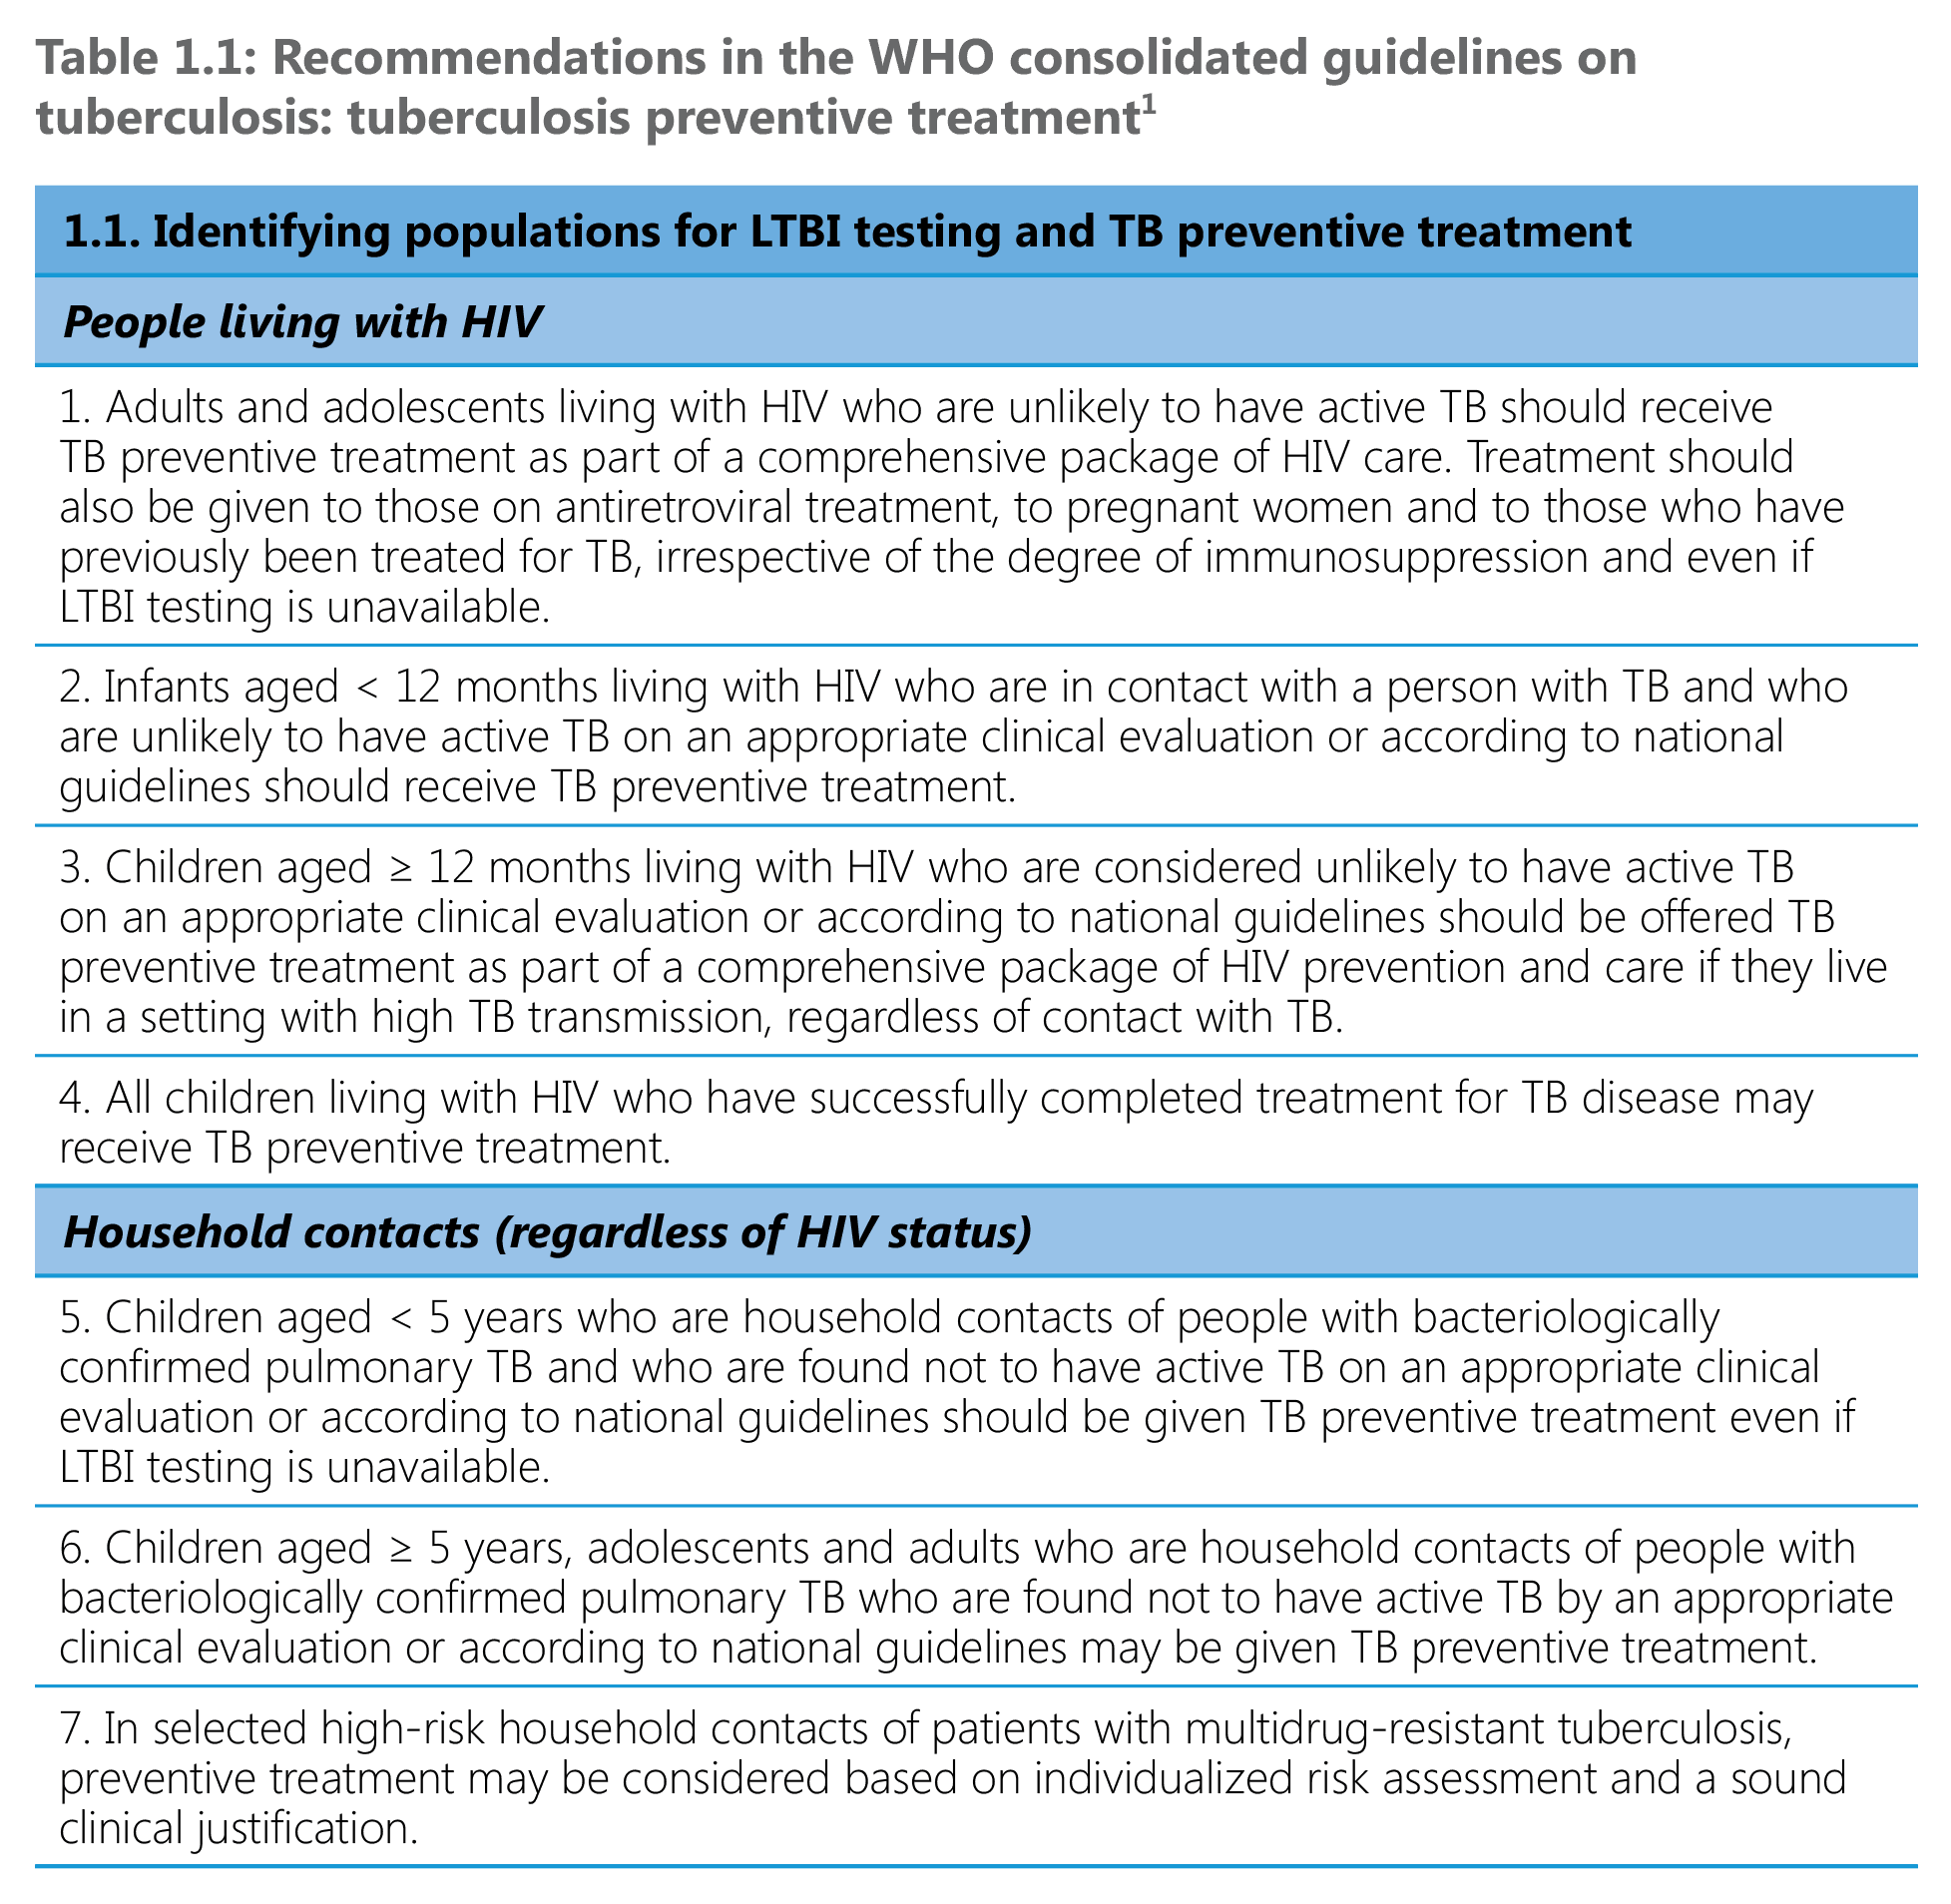 Recommendations in the WHO consolidated guidelines on tuberculosis